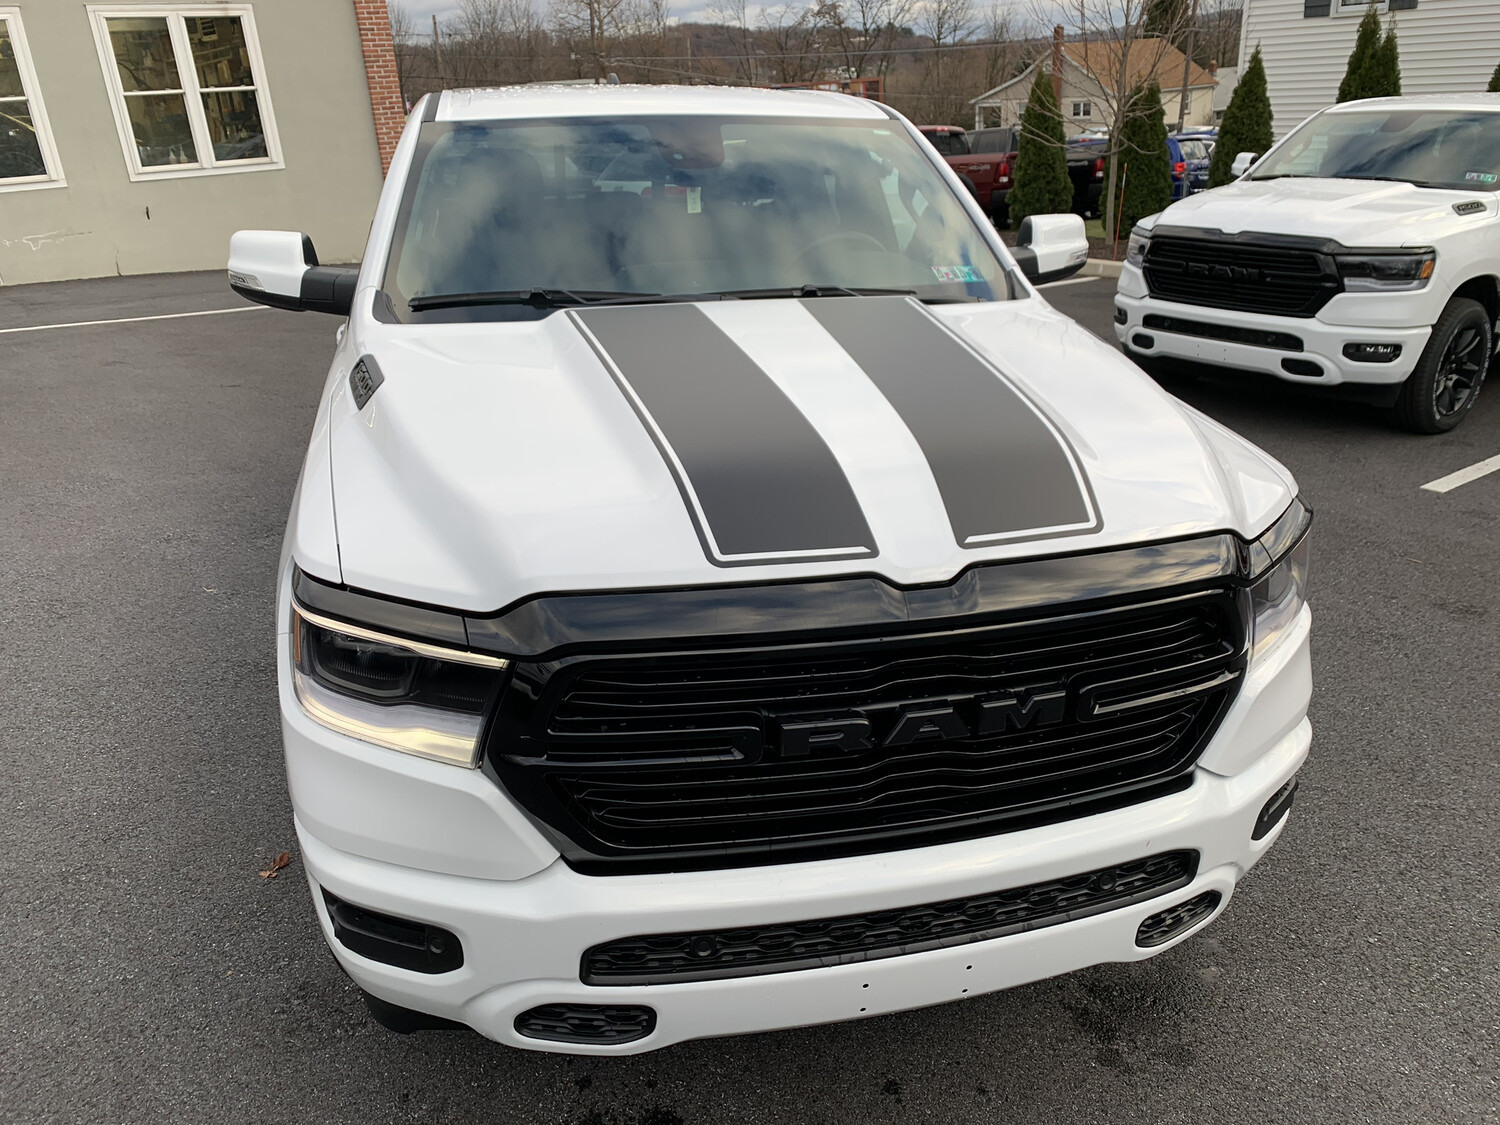 2019 - Up Ram 1500 Standard Hood and Tailgate Rally Stripes